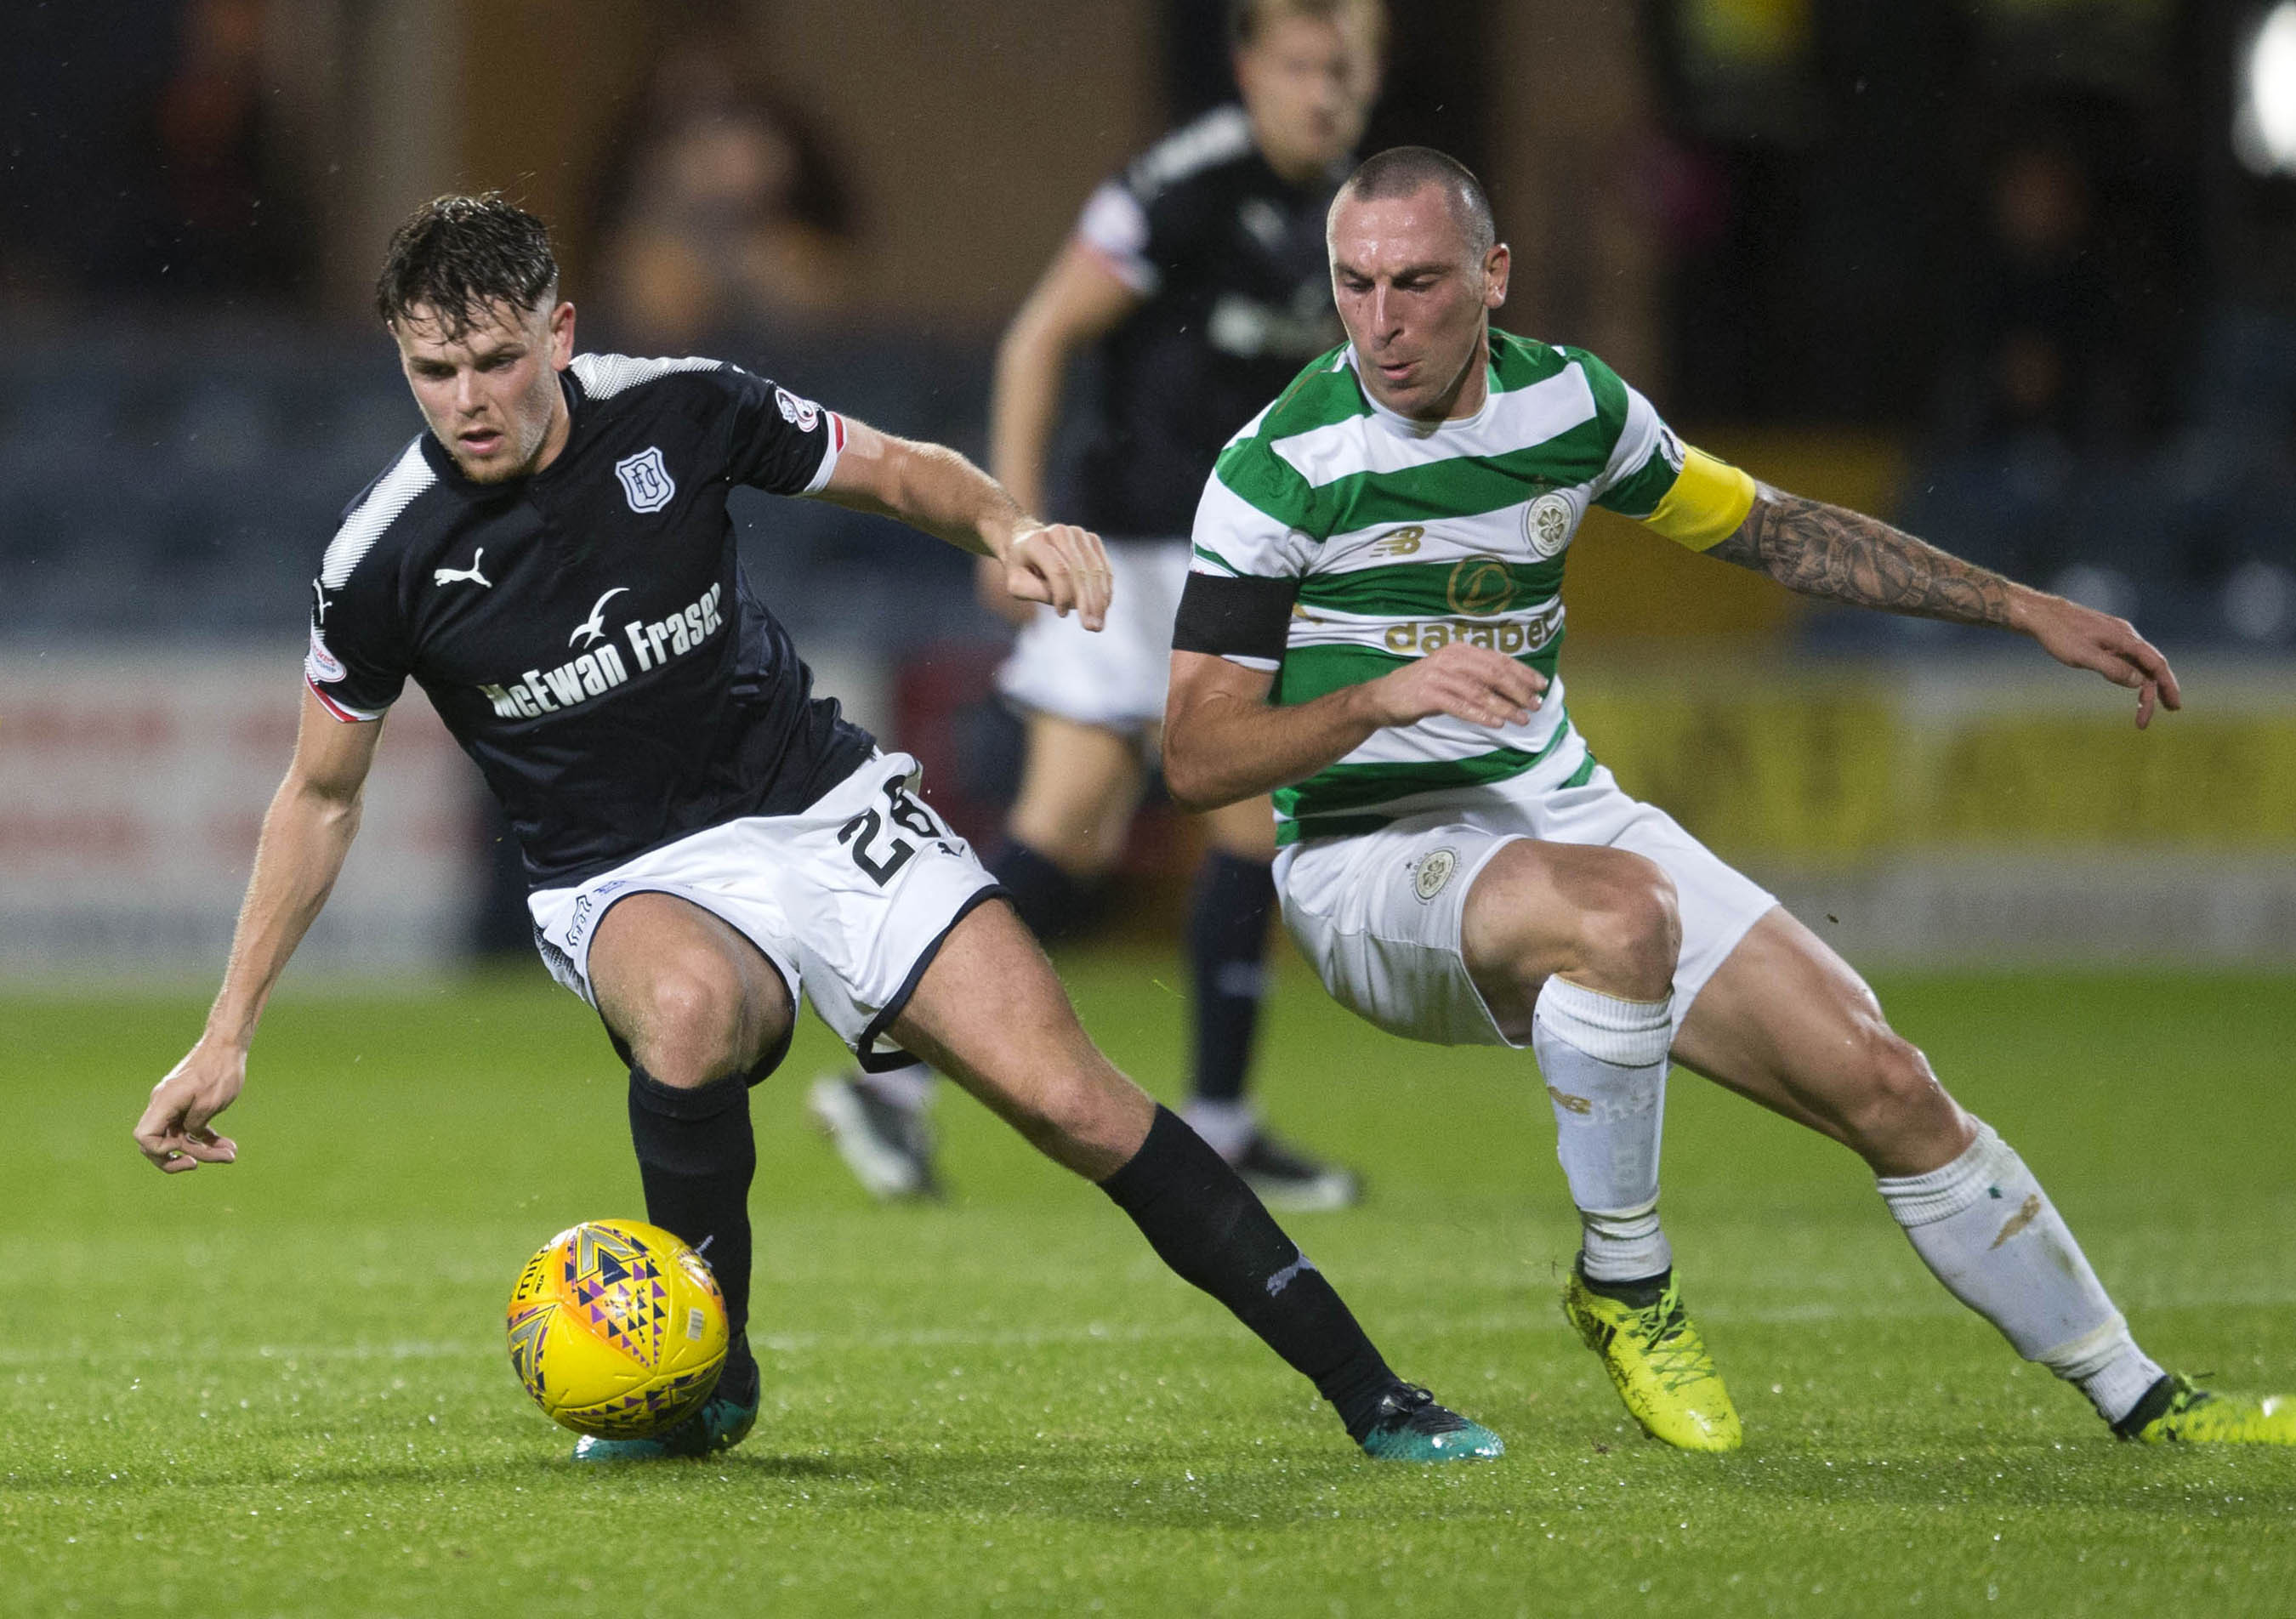 Dundee's Lewis Spence (left) and Celtic's Scott Brown (right) (Jeff Holmes/PA Wire)